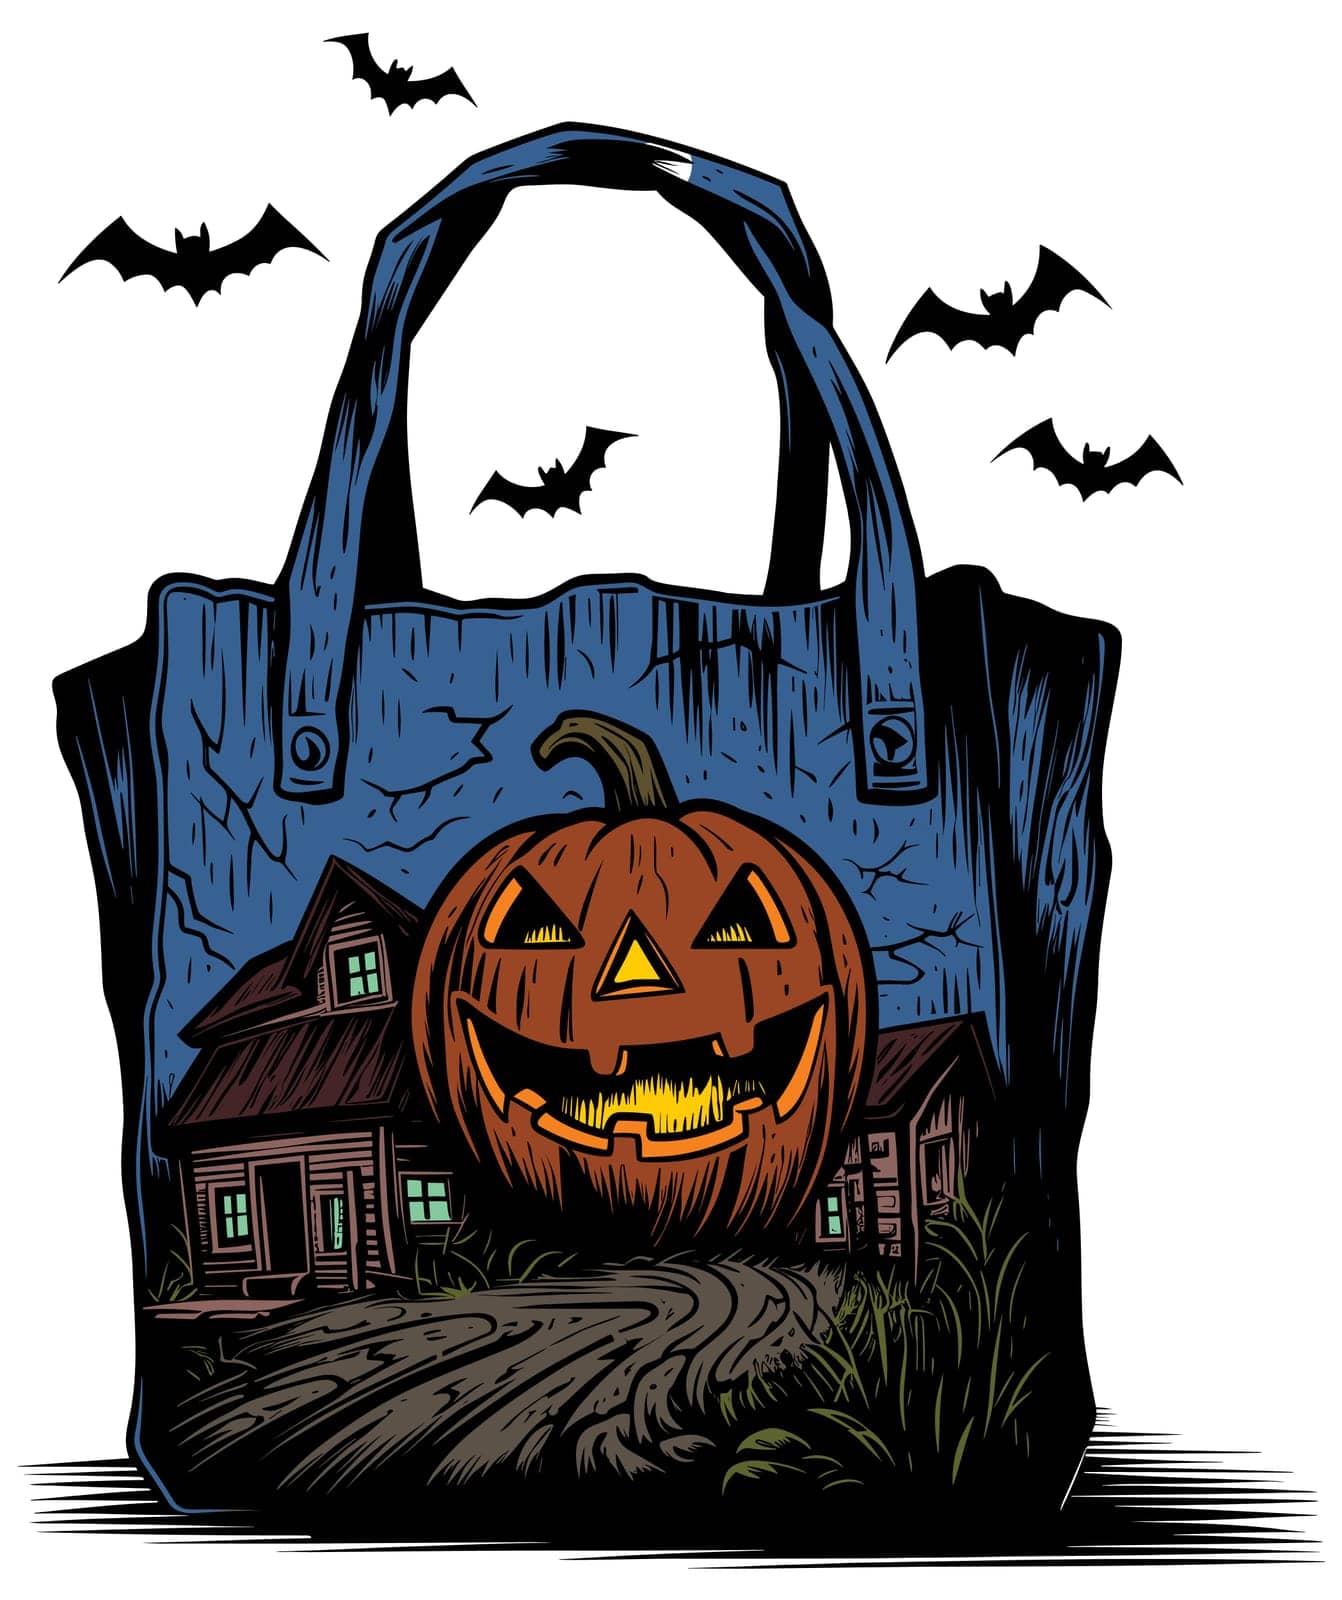 Illustration of spooky trick or treat bag on white background.